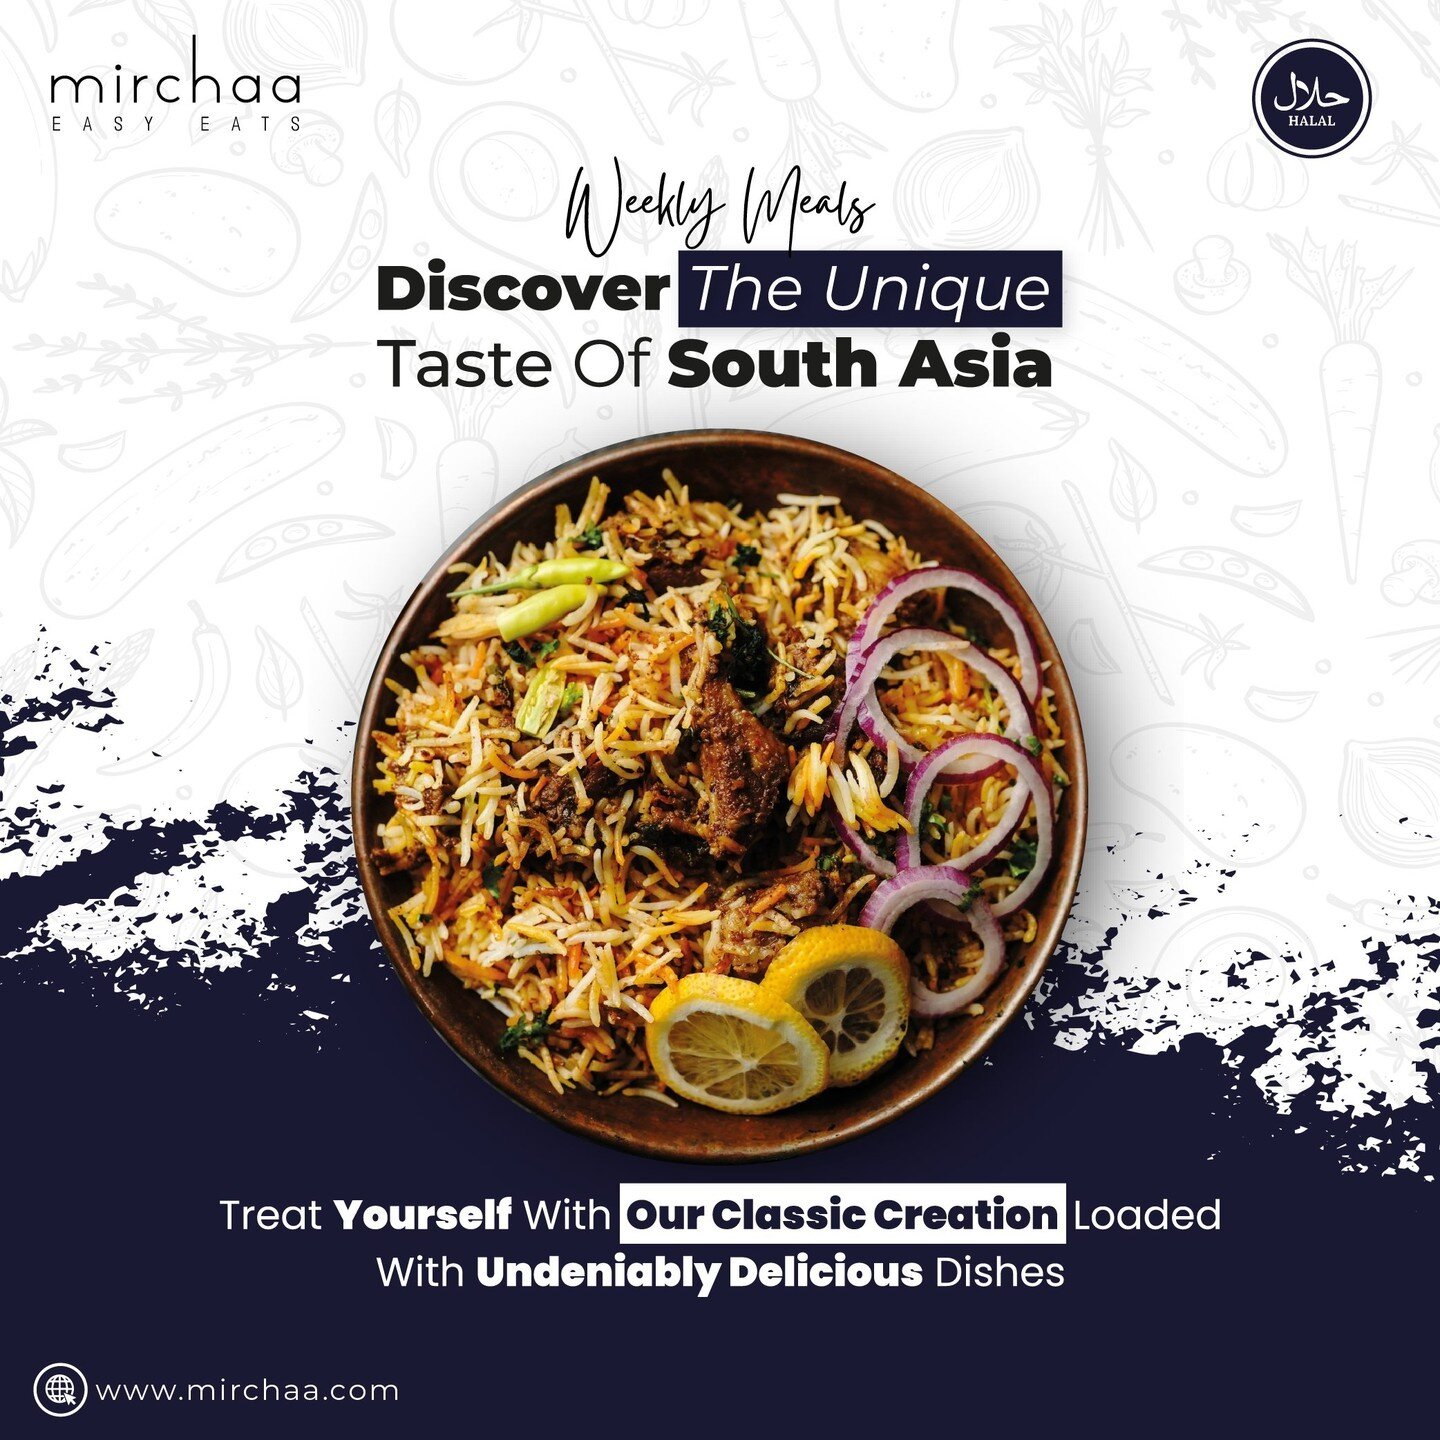 Say goodbye to kitchen worries and hello to the rich flavors of South Asia! 🌶️🍲 No stress about what to cook, grocery runs, cooking time, or cleanup &ndash; just pure enjoyment of delicious meals. Rediscover the joy of savoring food without the has